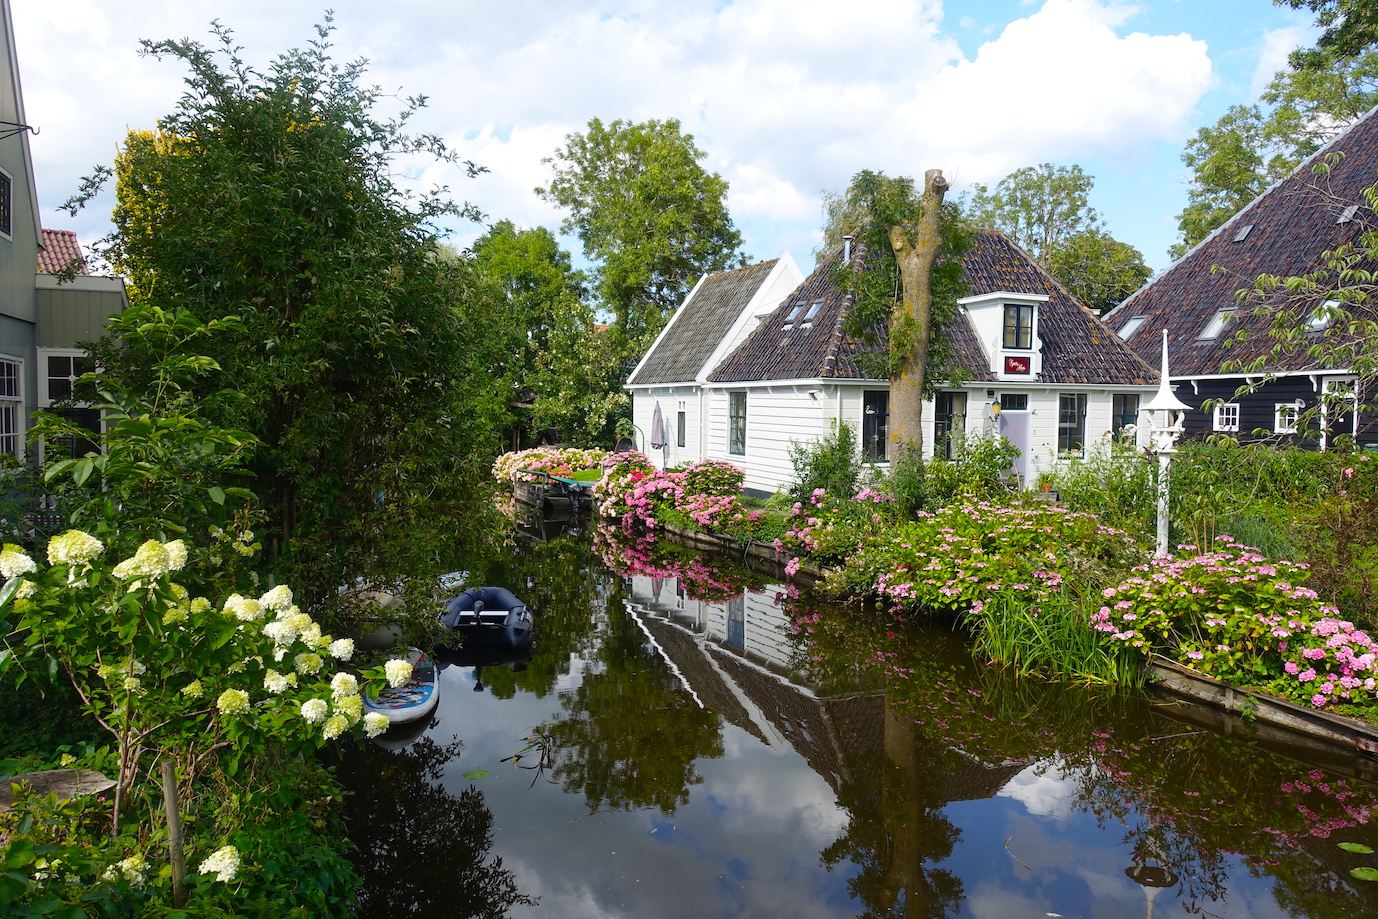 Broek in Waterland house with pink and white flowers and water reflections